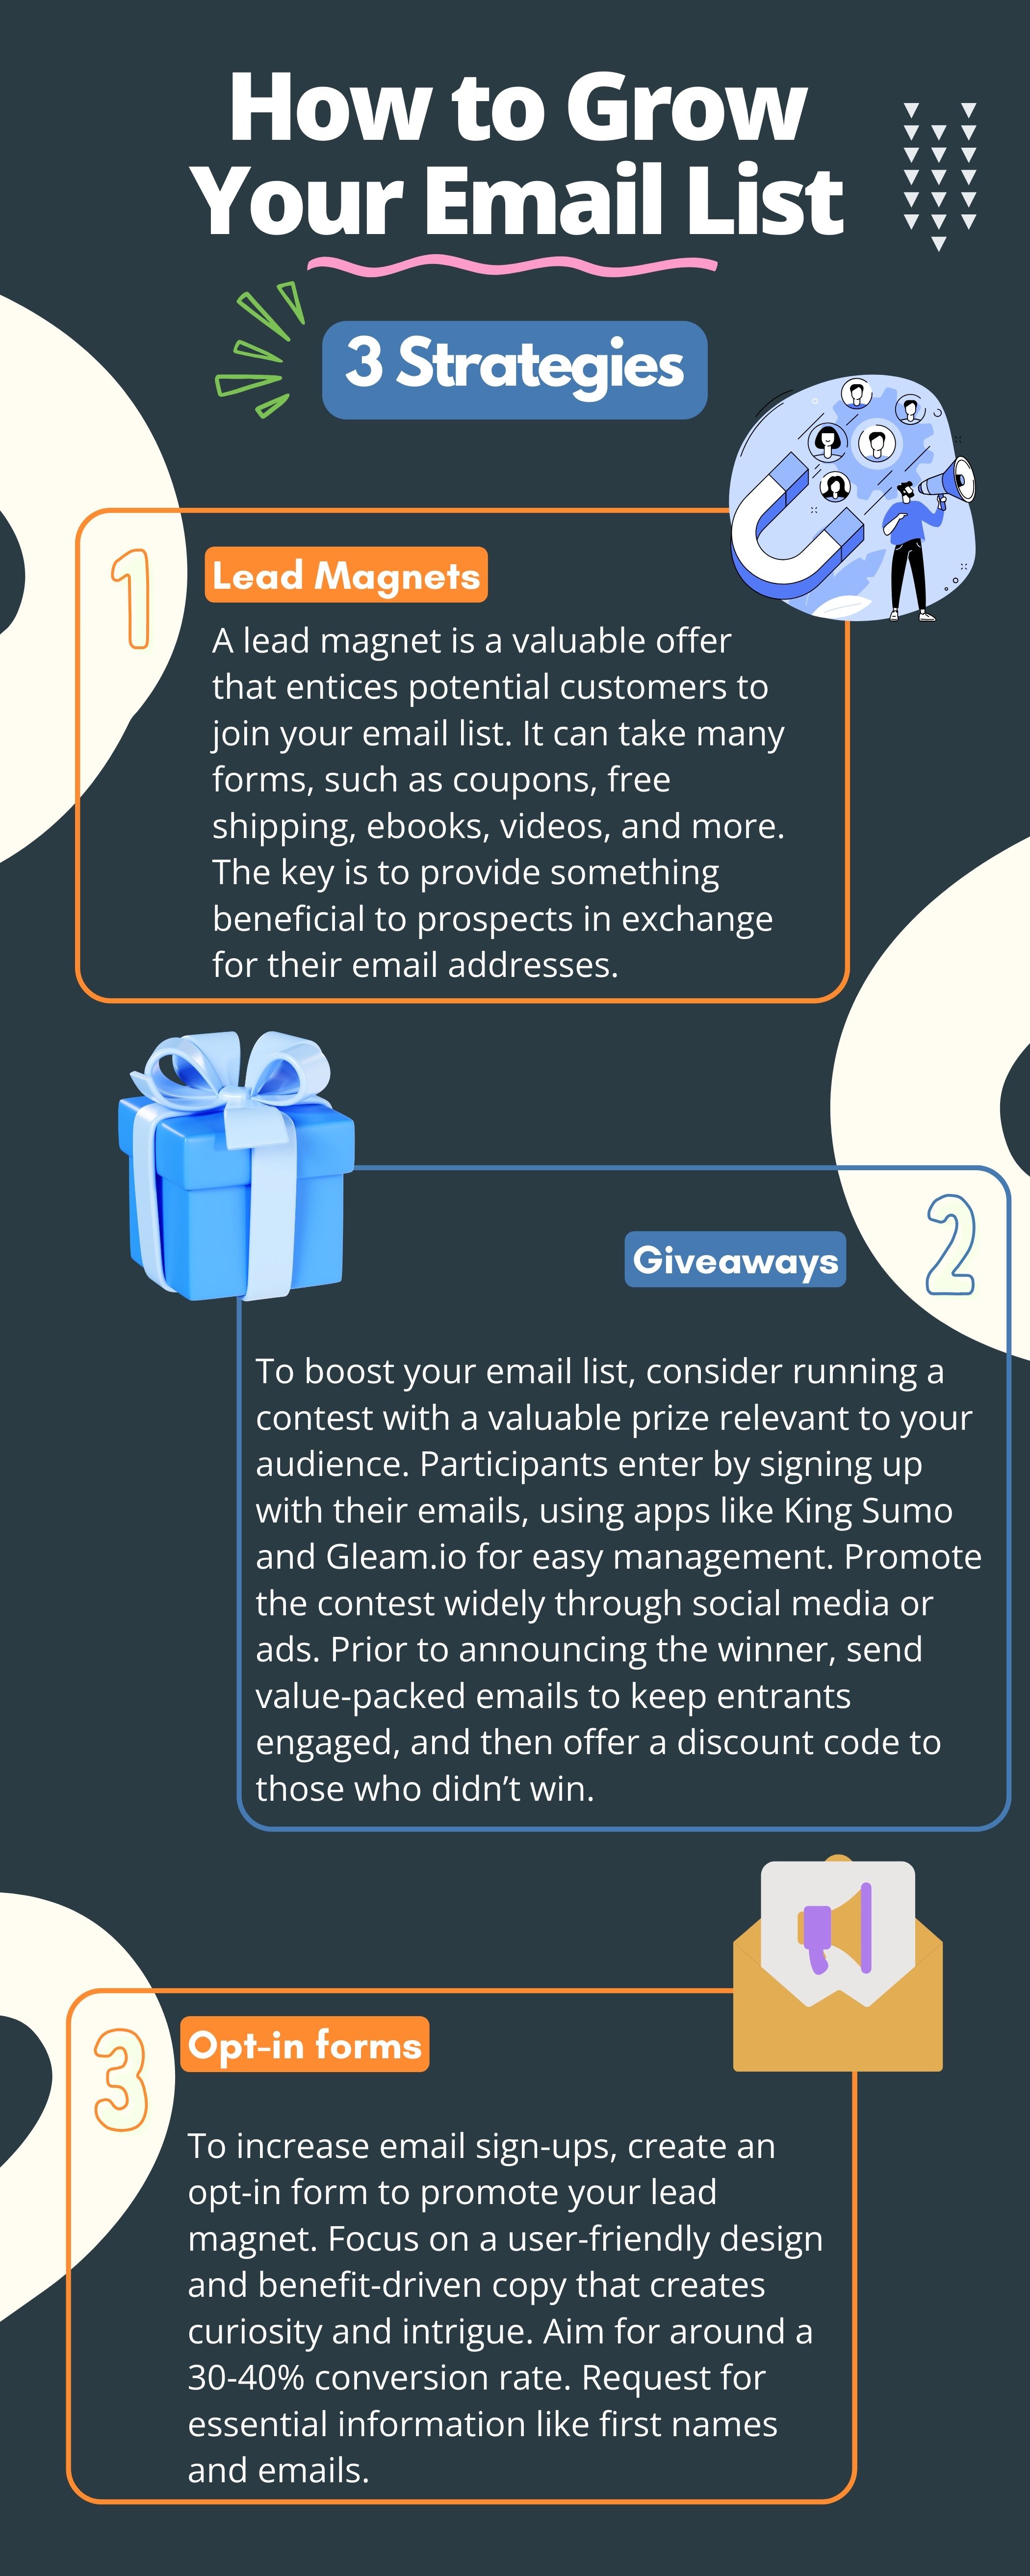 Growing an email list with 3 strategies, including giveaways, lead magnets, and optin pages.